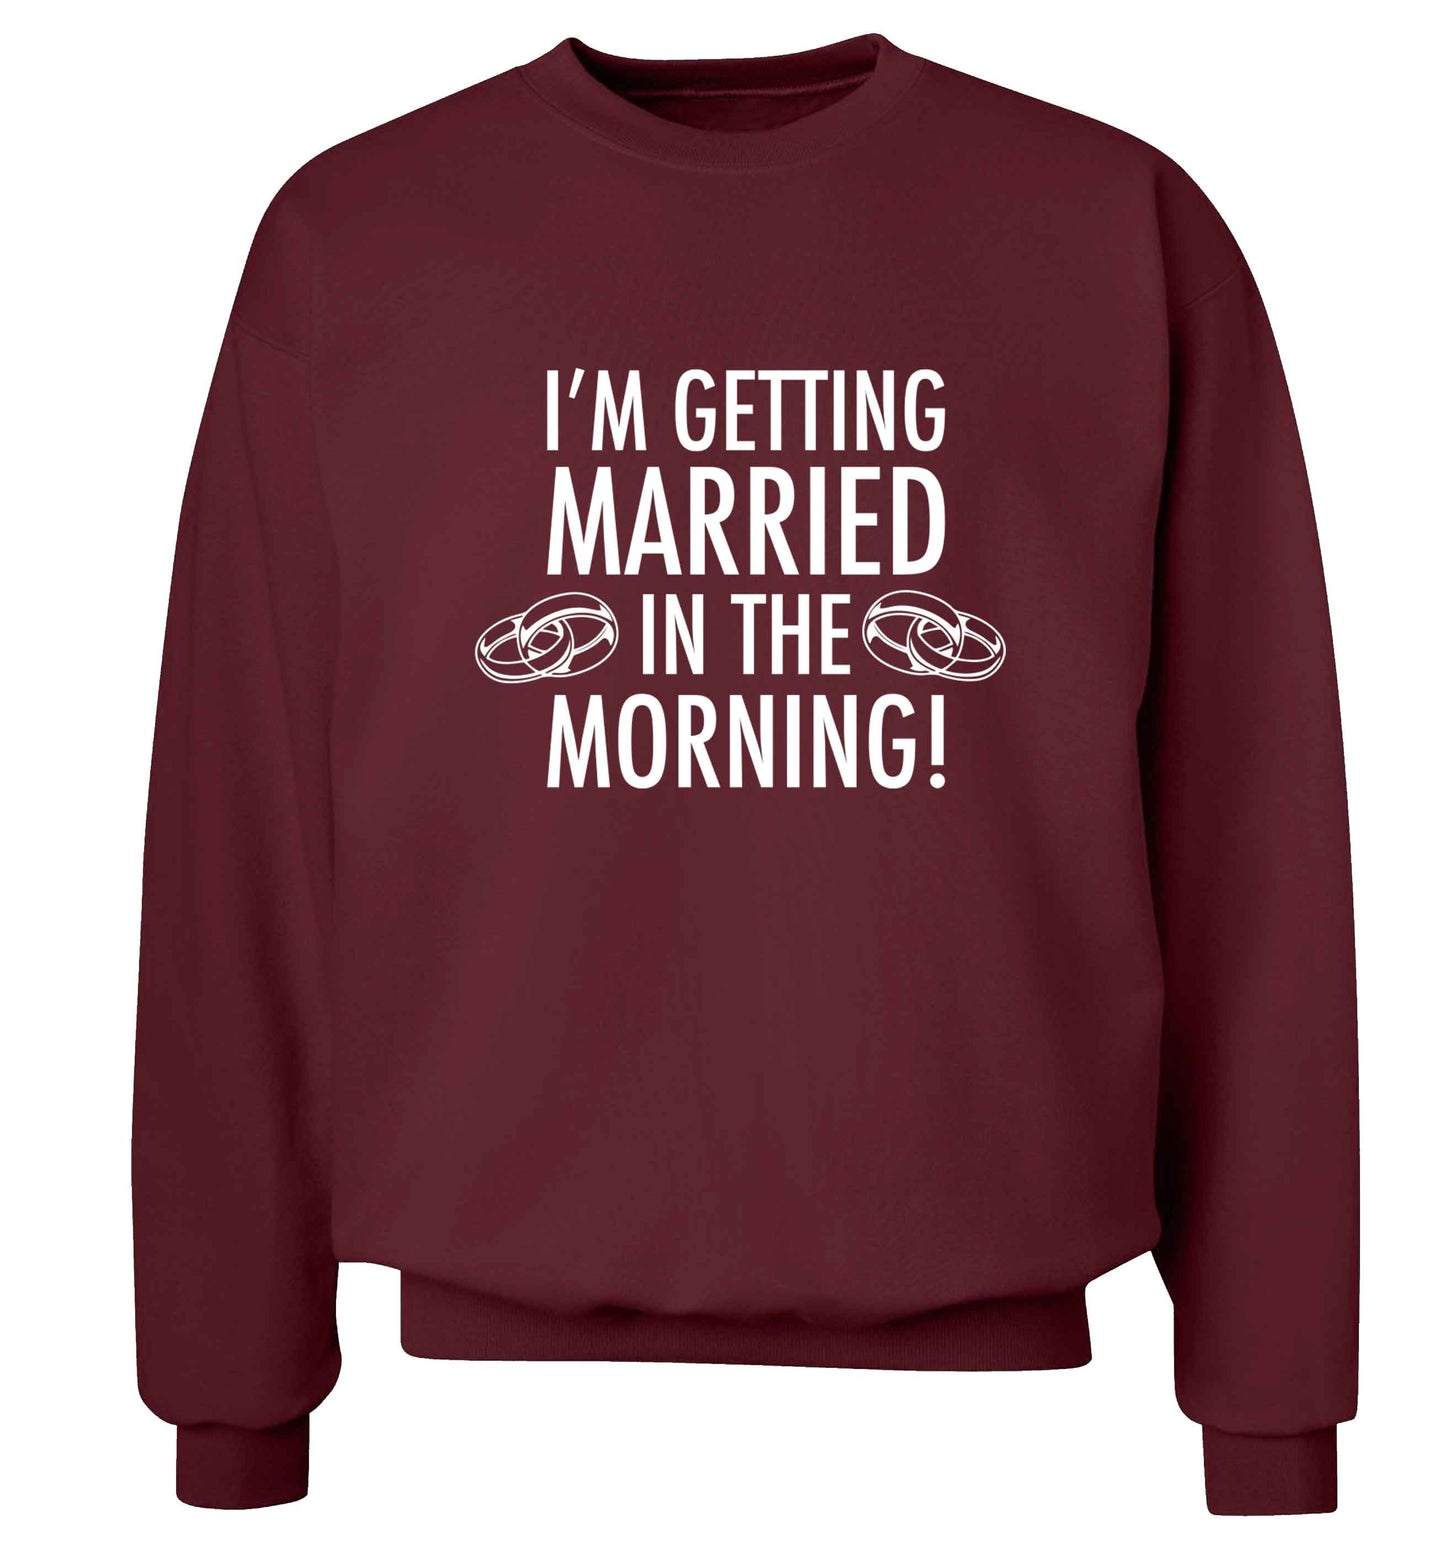 I'm getting married in the morning! adult's unisex maroon sweater 2XL